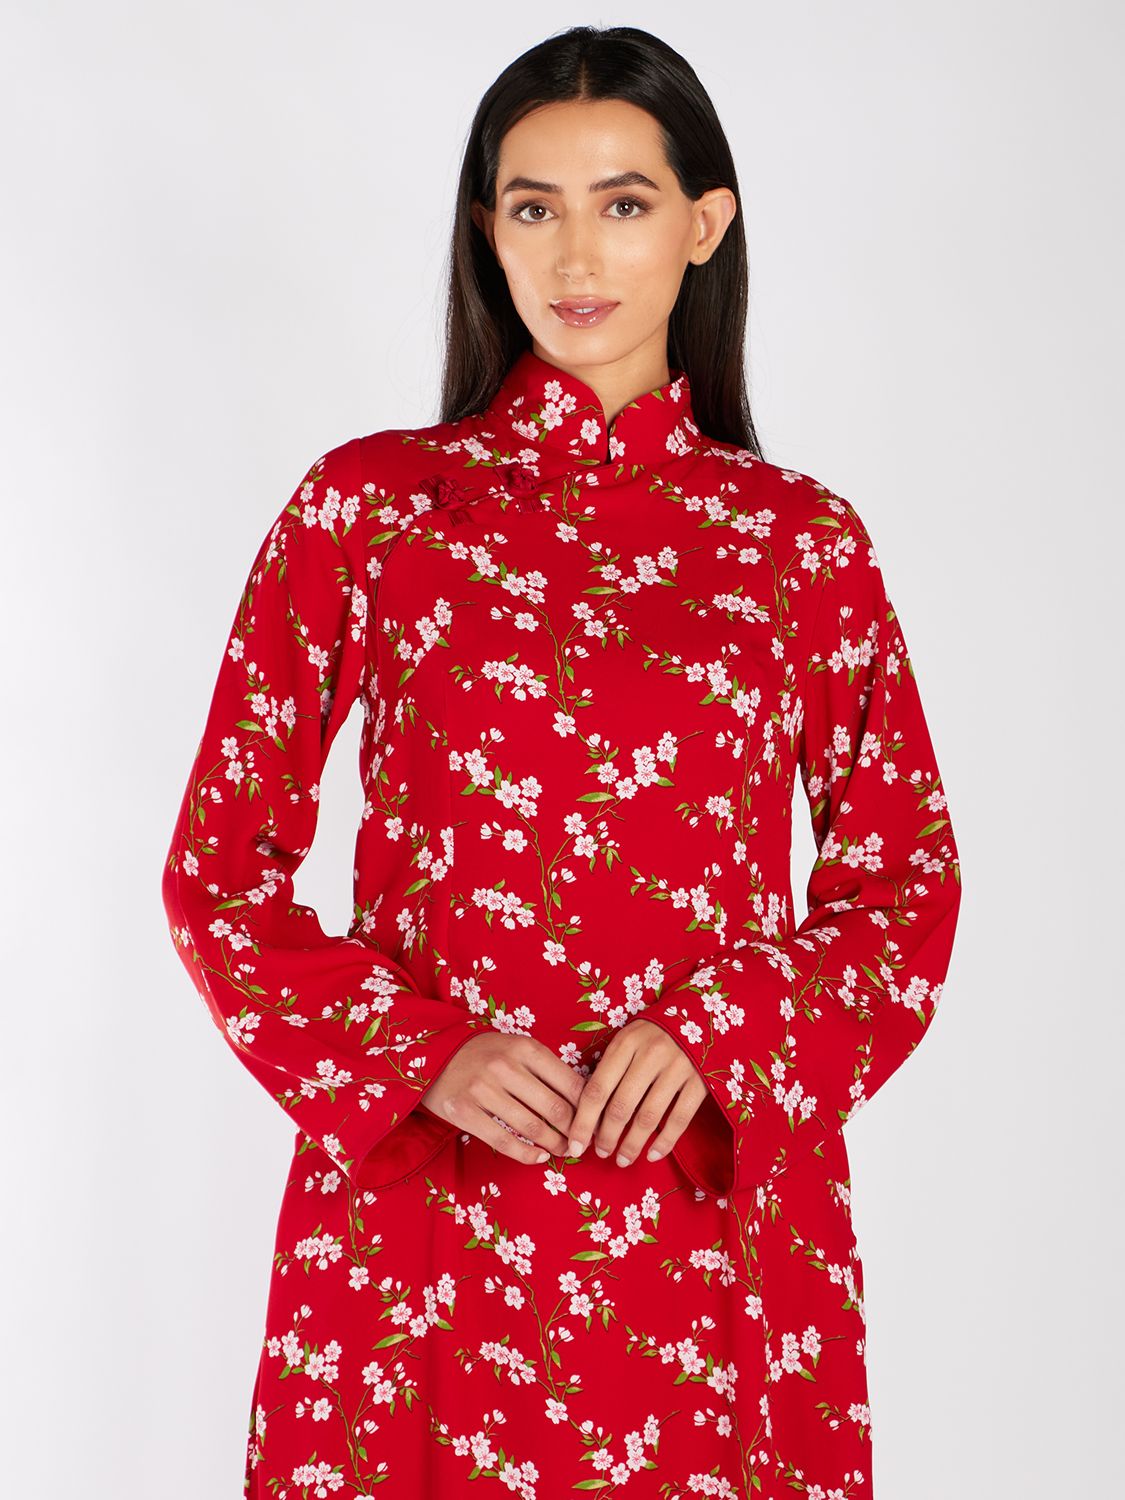 Buy Aab Oriental Flowers Maxi Dress, Red Online at johnlewis.com